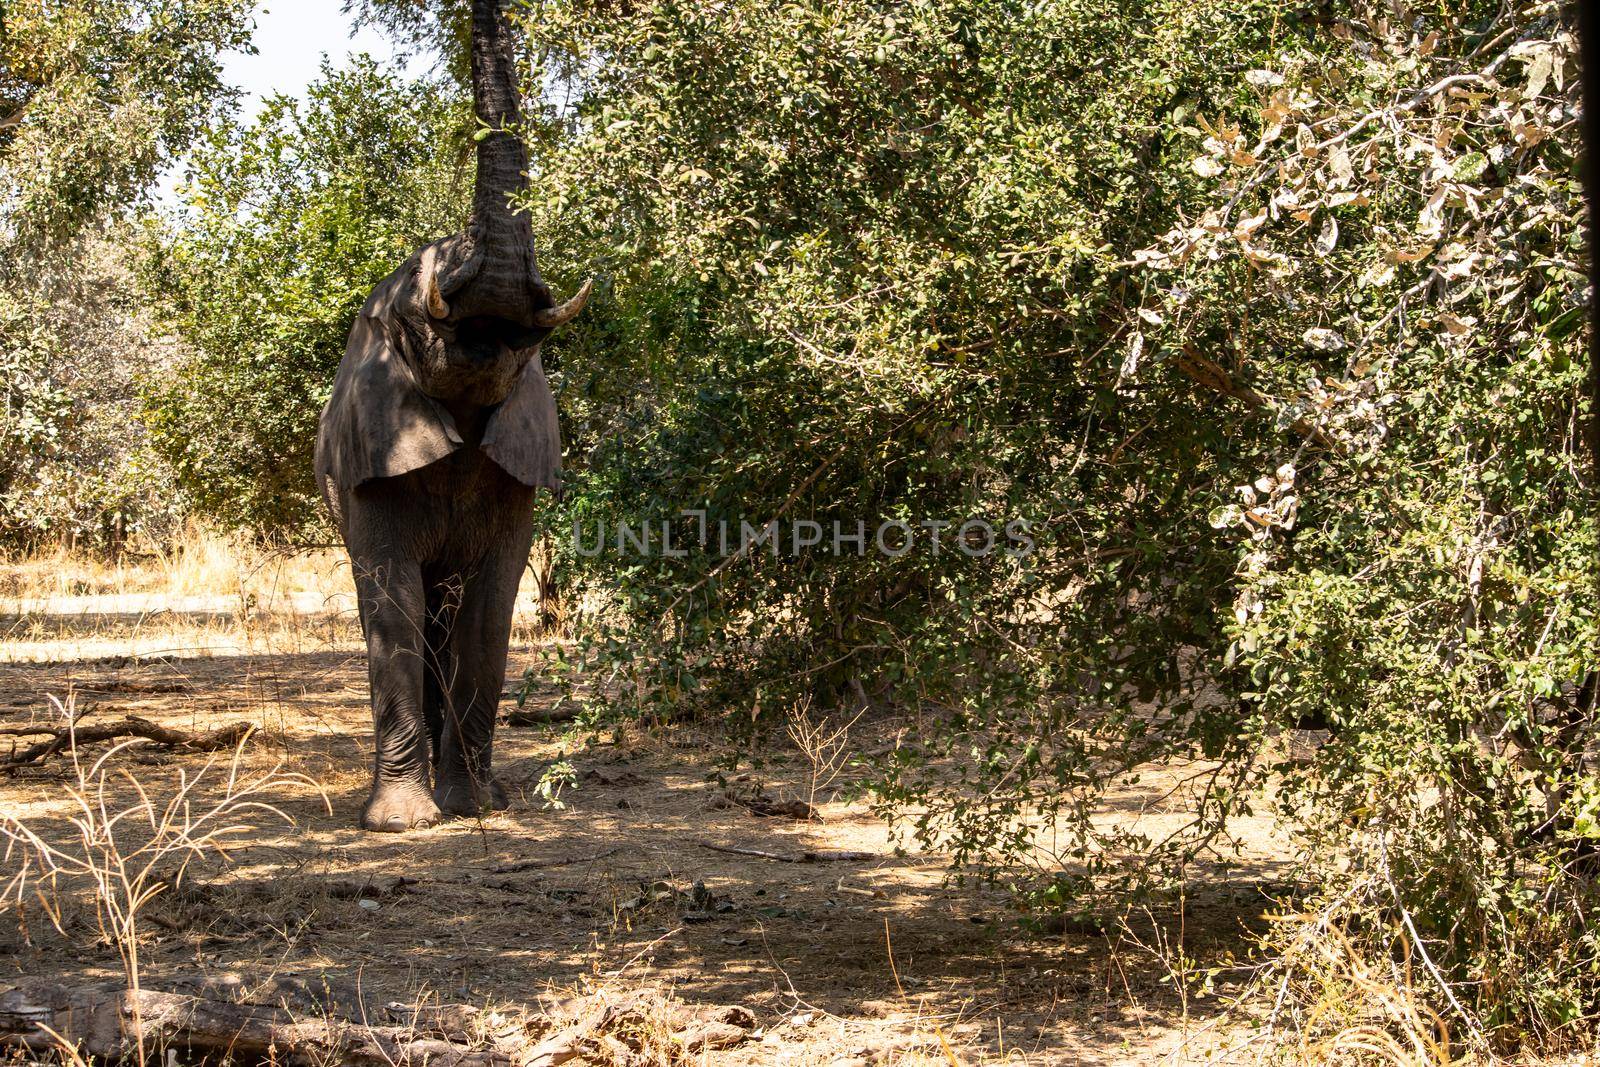 An amazing close up of a huge elephant eating in the bush